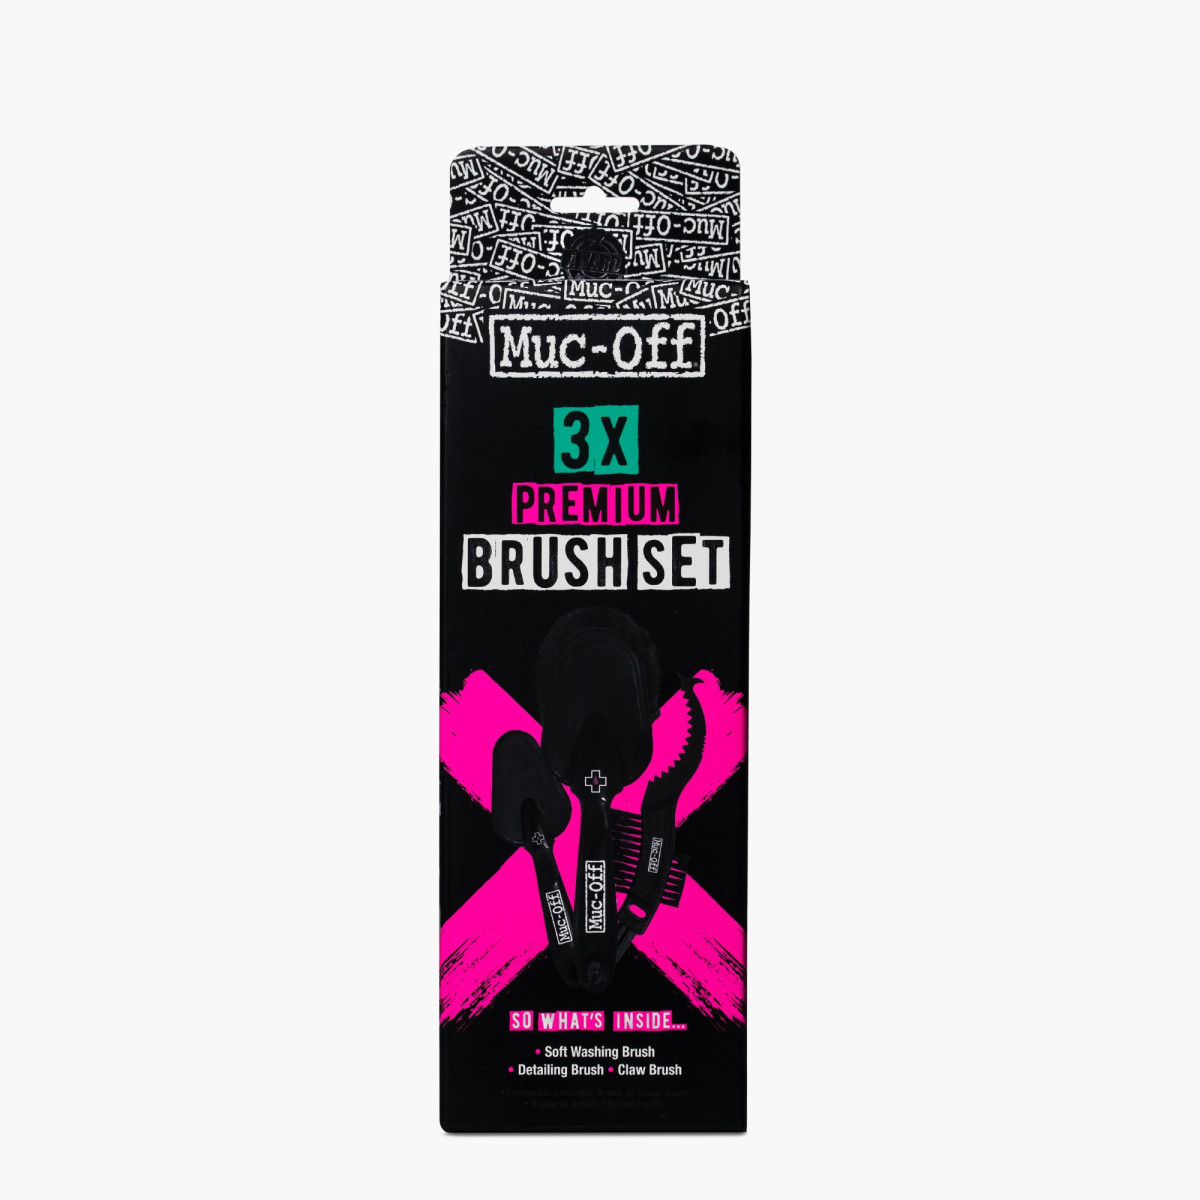 Muc-Off Dry Weather Lube / 50 ml